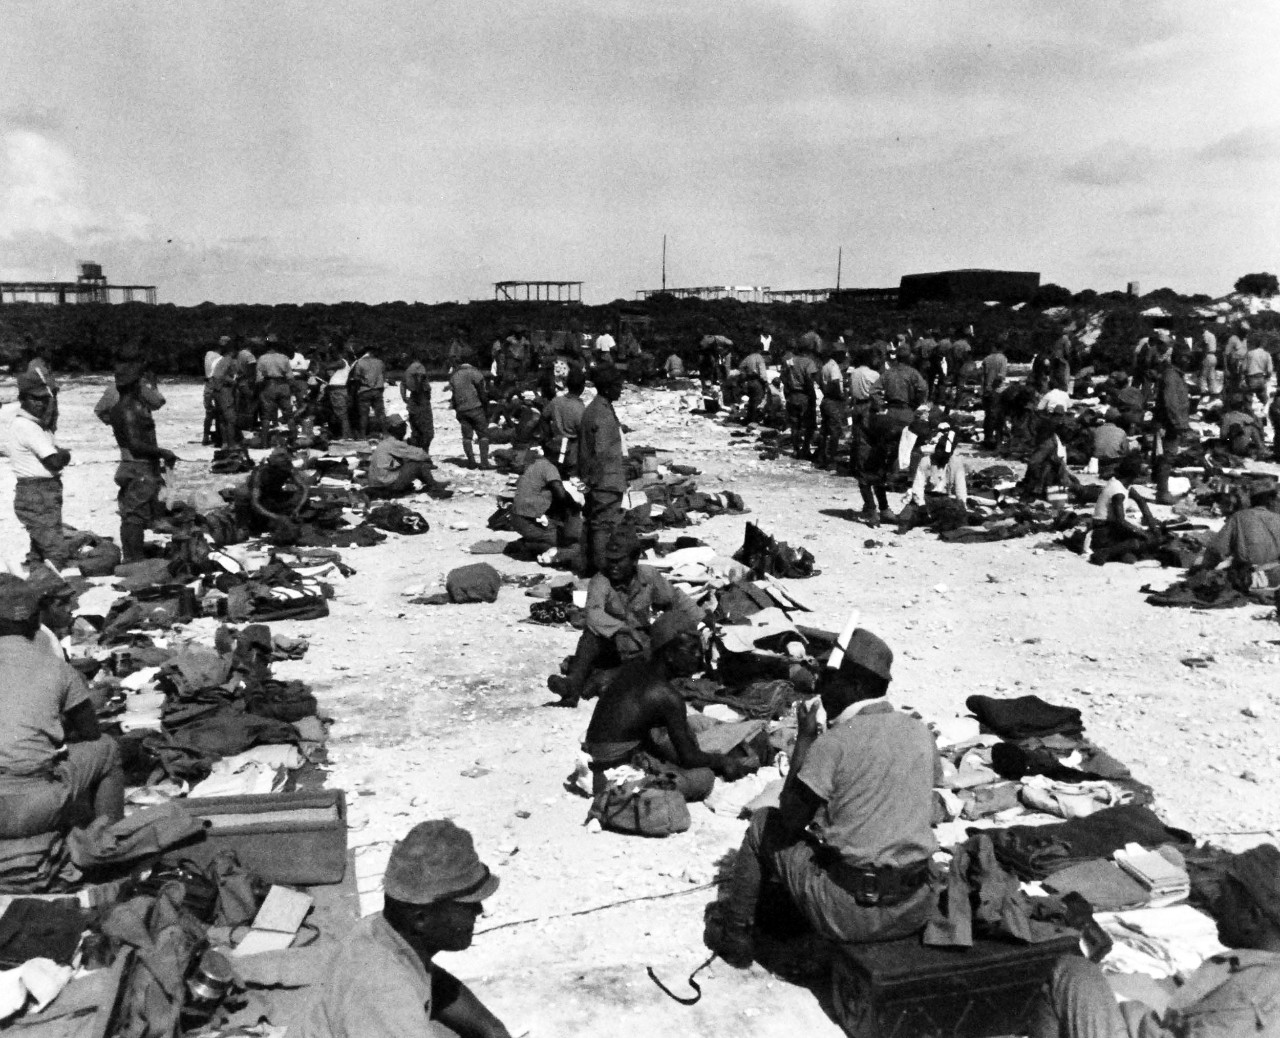 80-G-495799:  Surrender of Wake Island, September 1945.  Japanese await inspection of their gear before evacuation from Wake Island.  Photograph released 1 November 1945.  U.S. Navy photograph, now in the collections of the National Archives.   (2014/5/29).